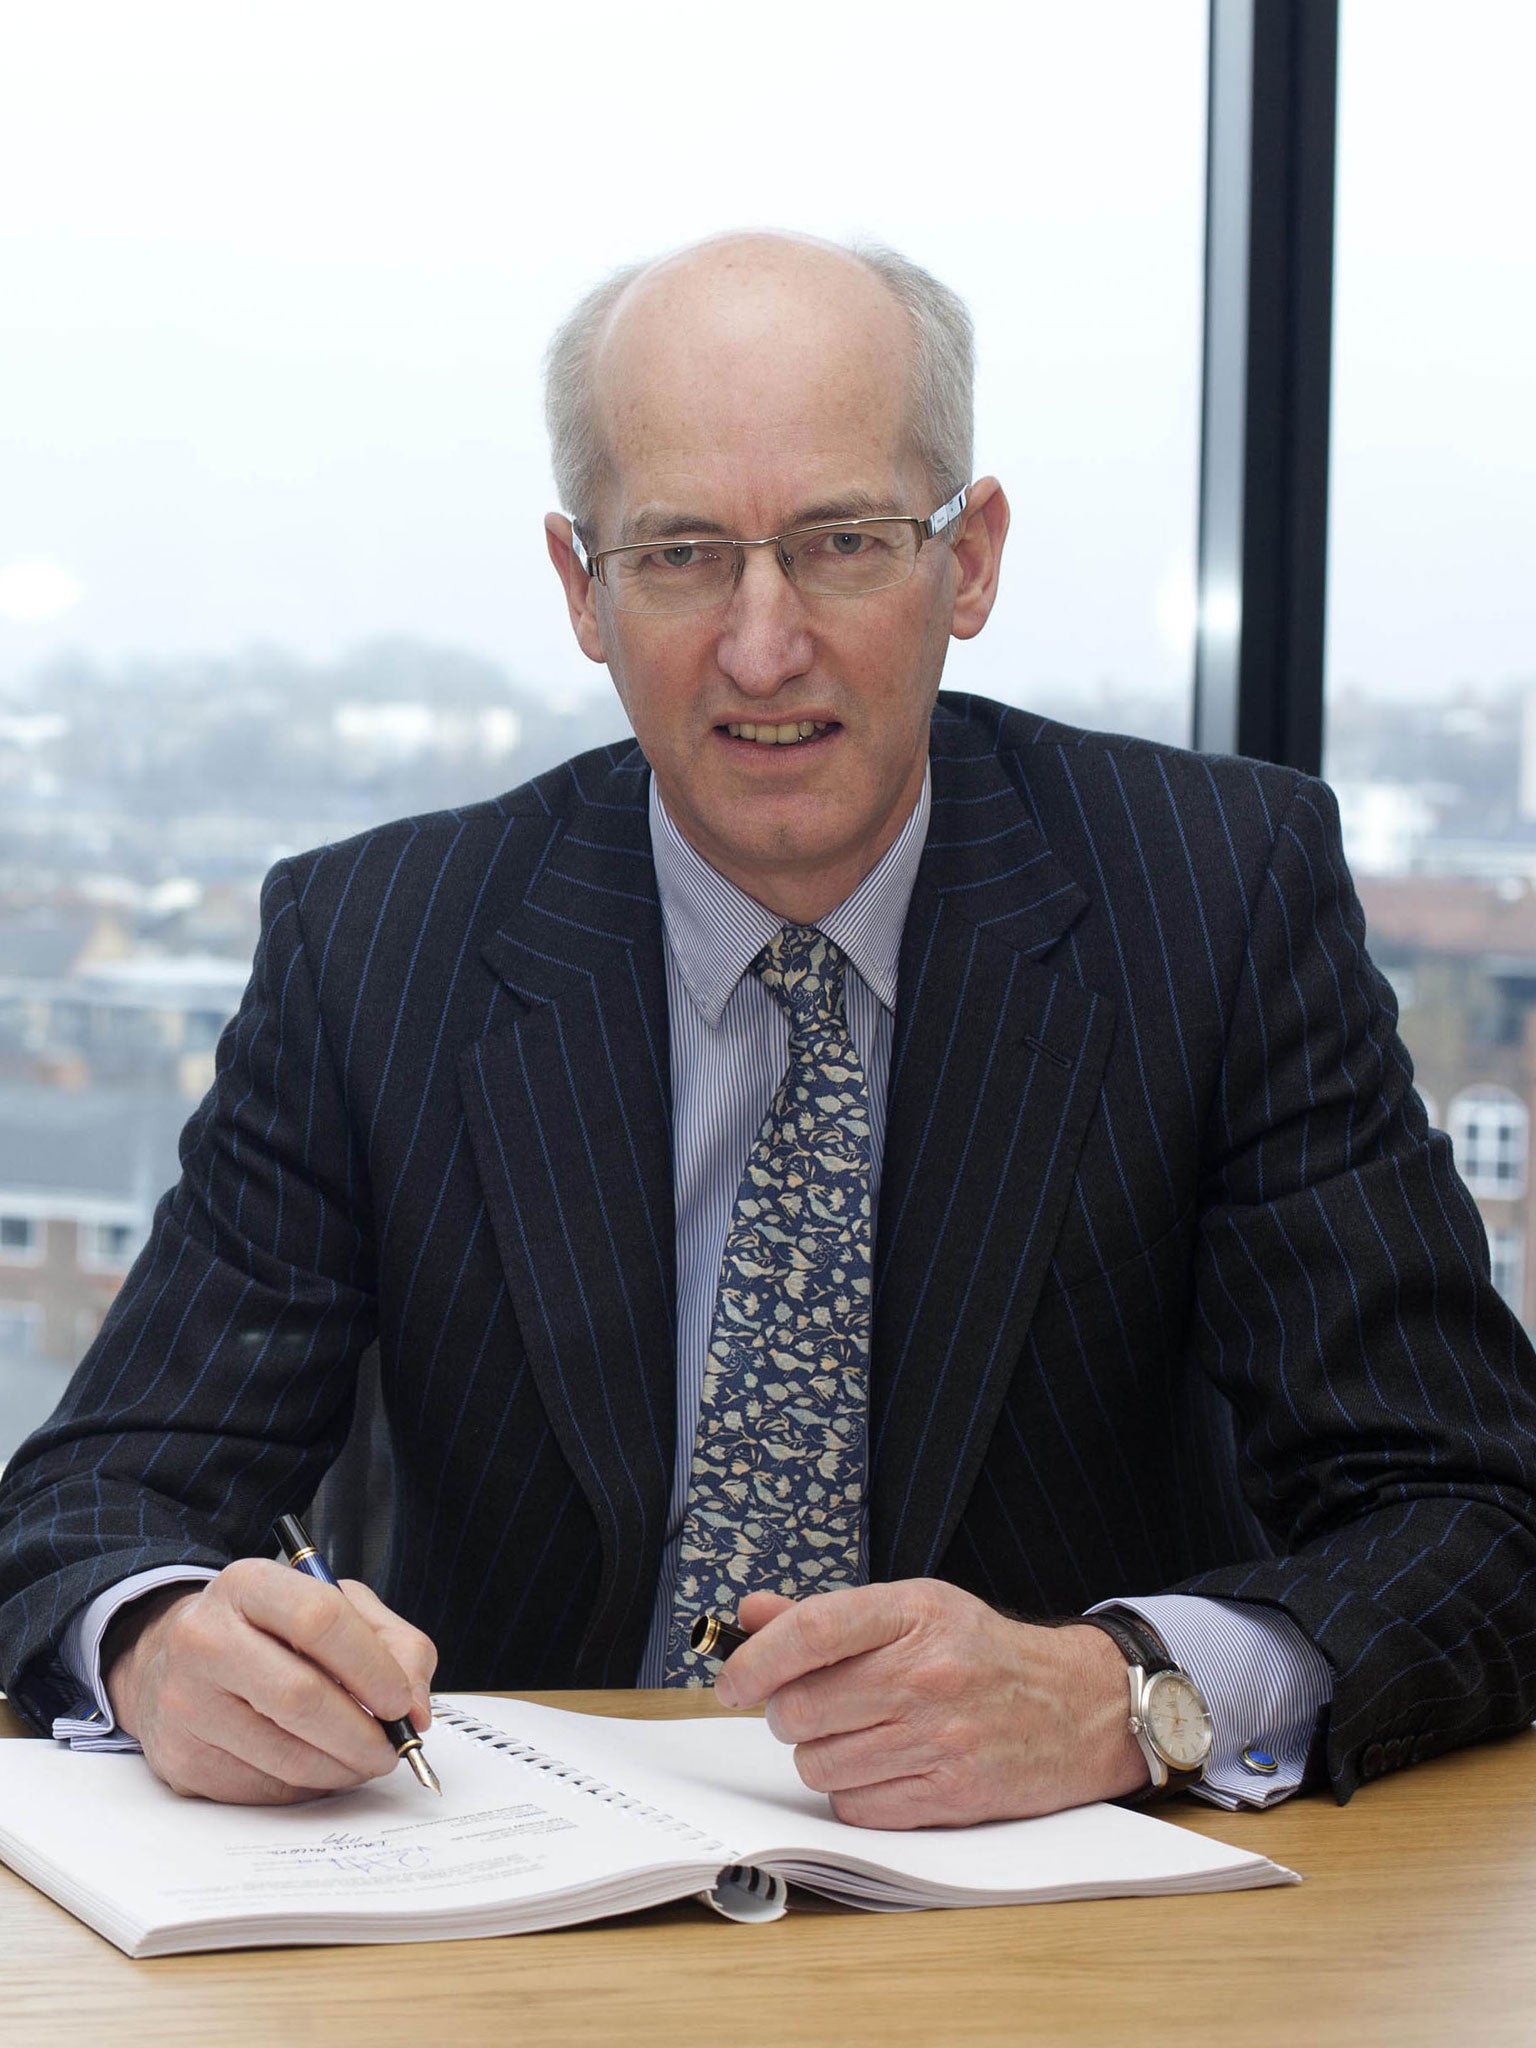 The new head of HS2, Sir David Higgins, will begin by reporting on the costs and benefits of the project